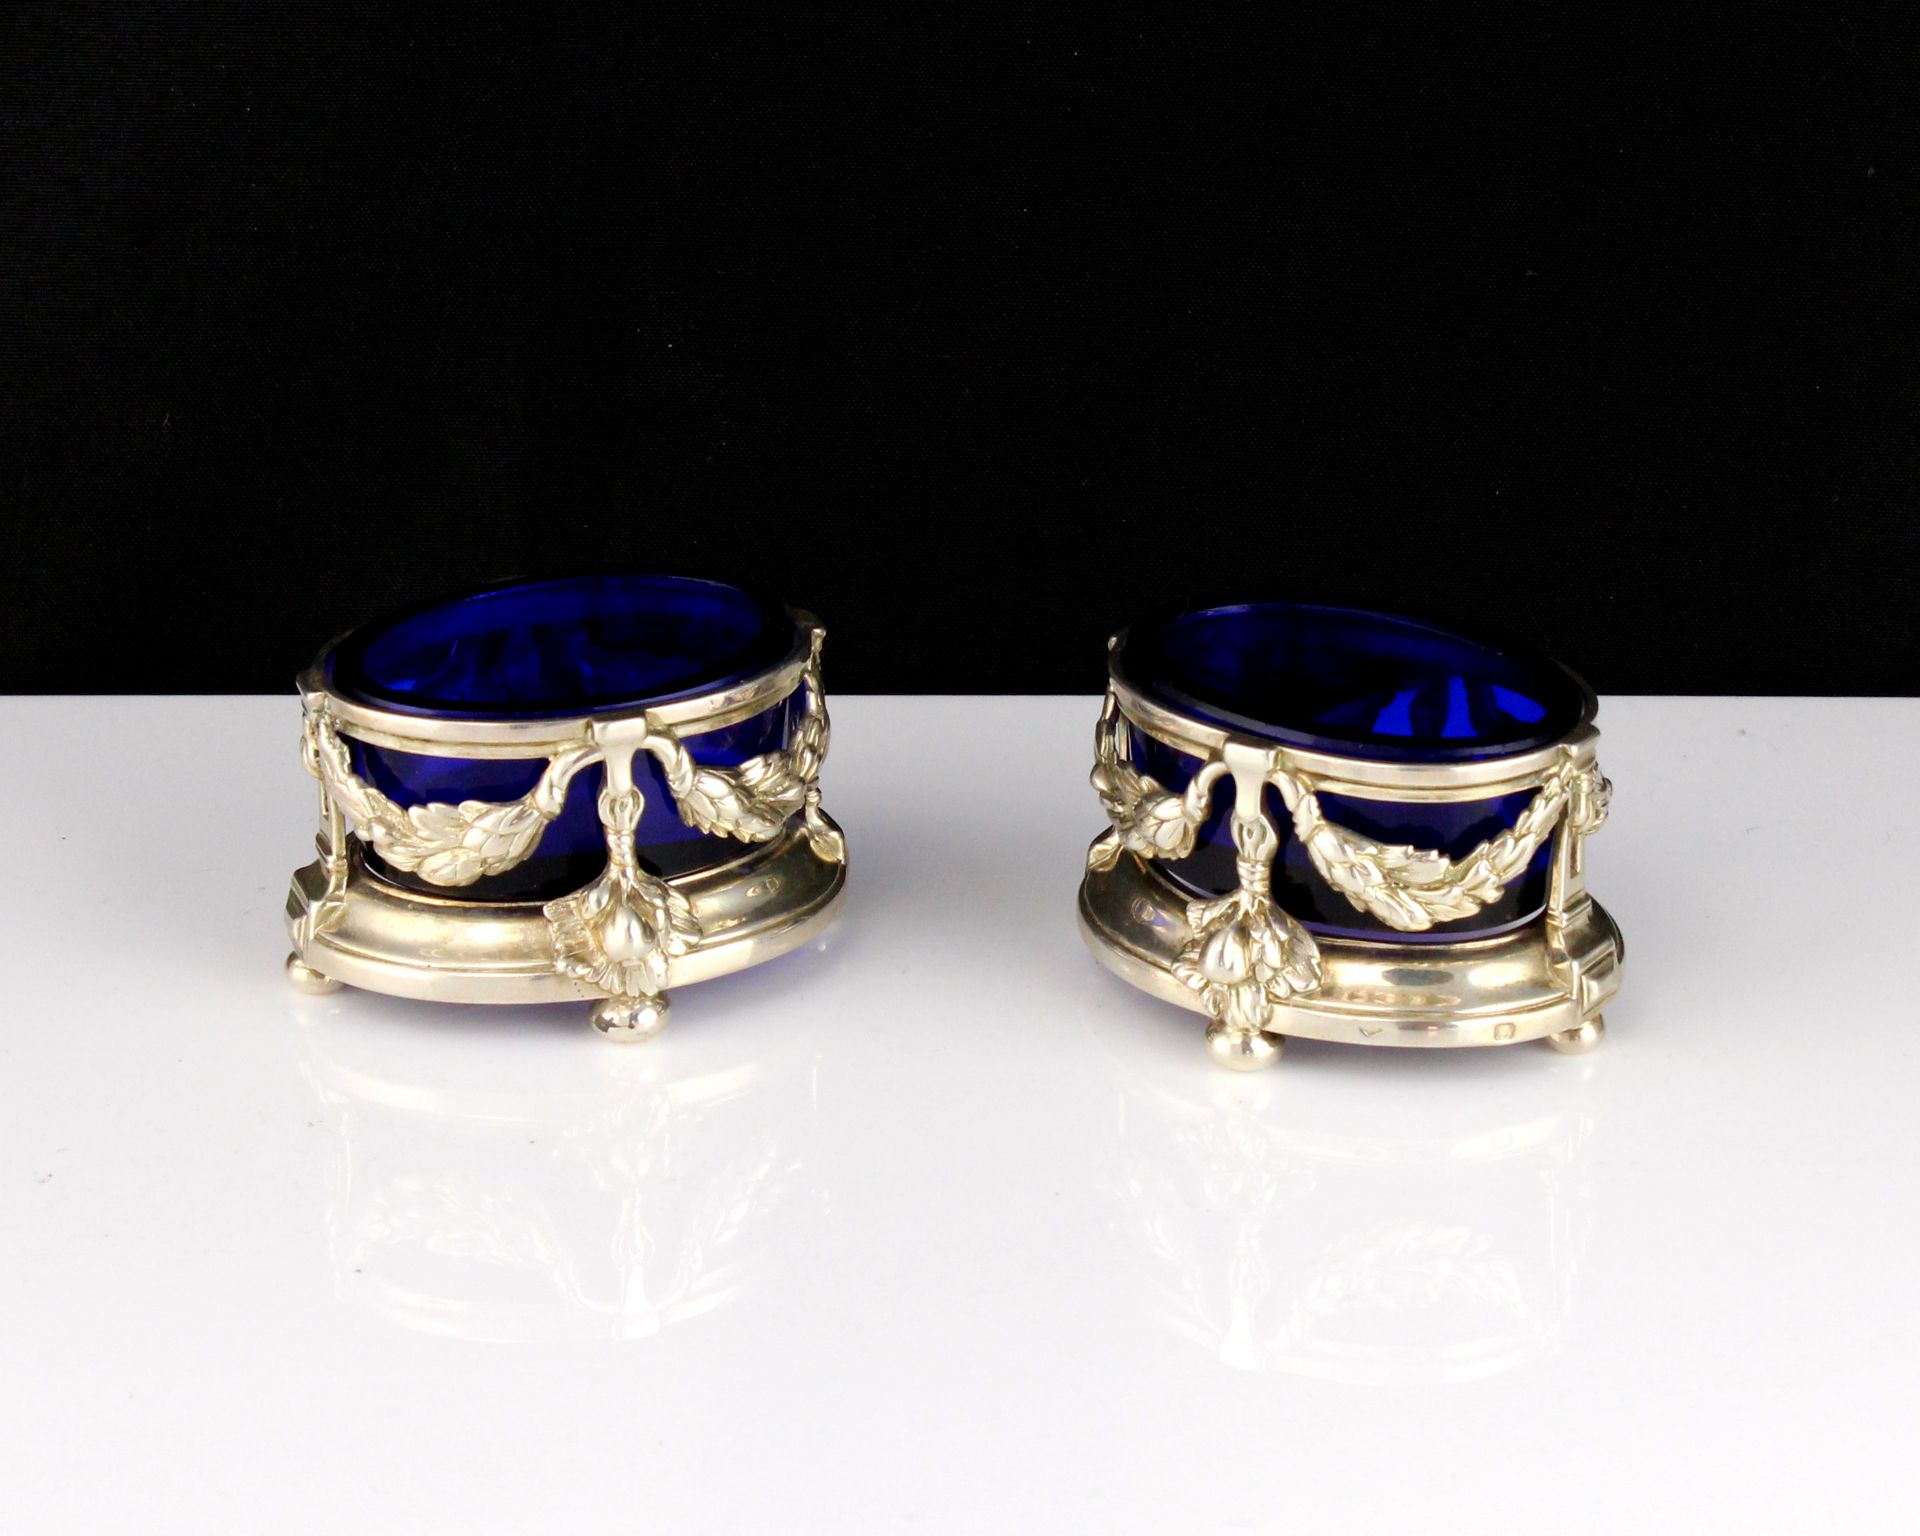 A pair of antique 19th Century French Silver salt cellars each of oval form, designed with